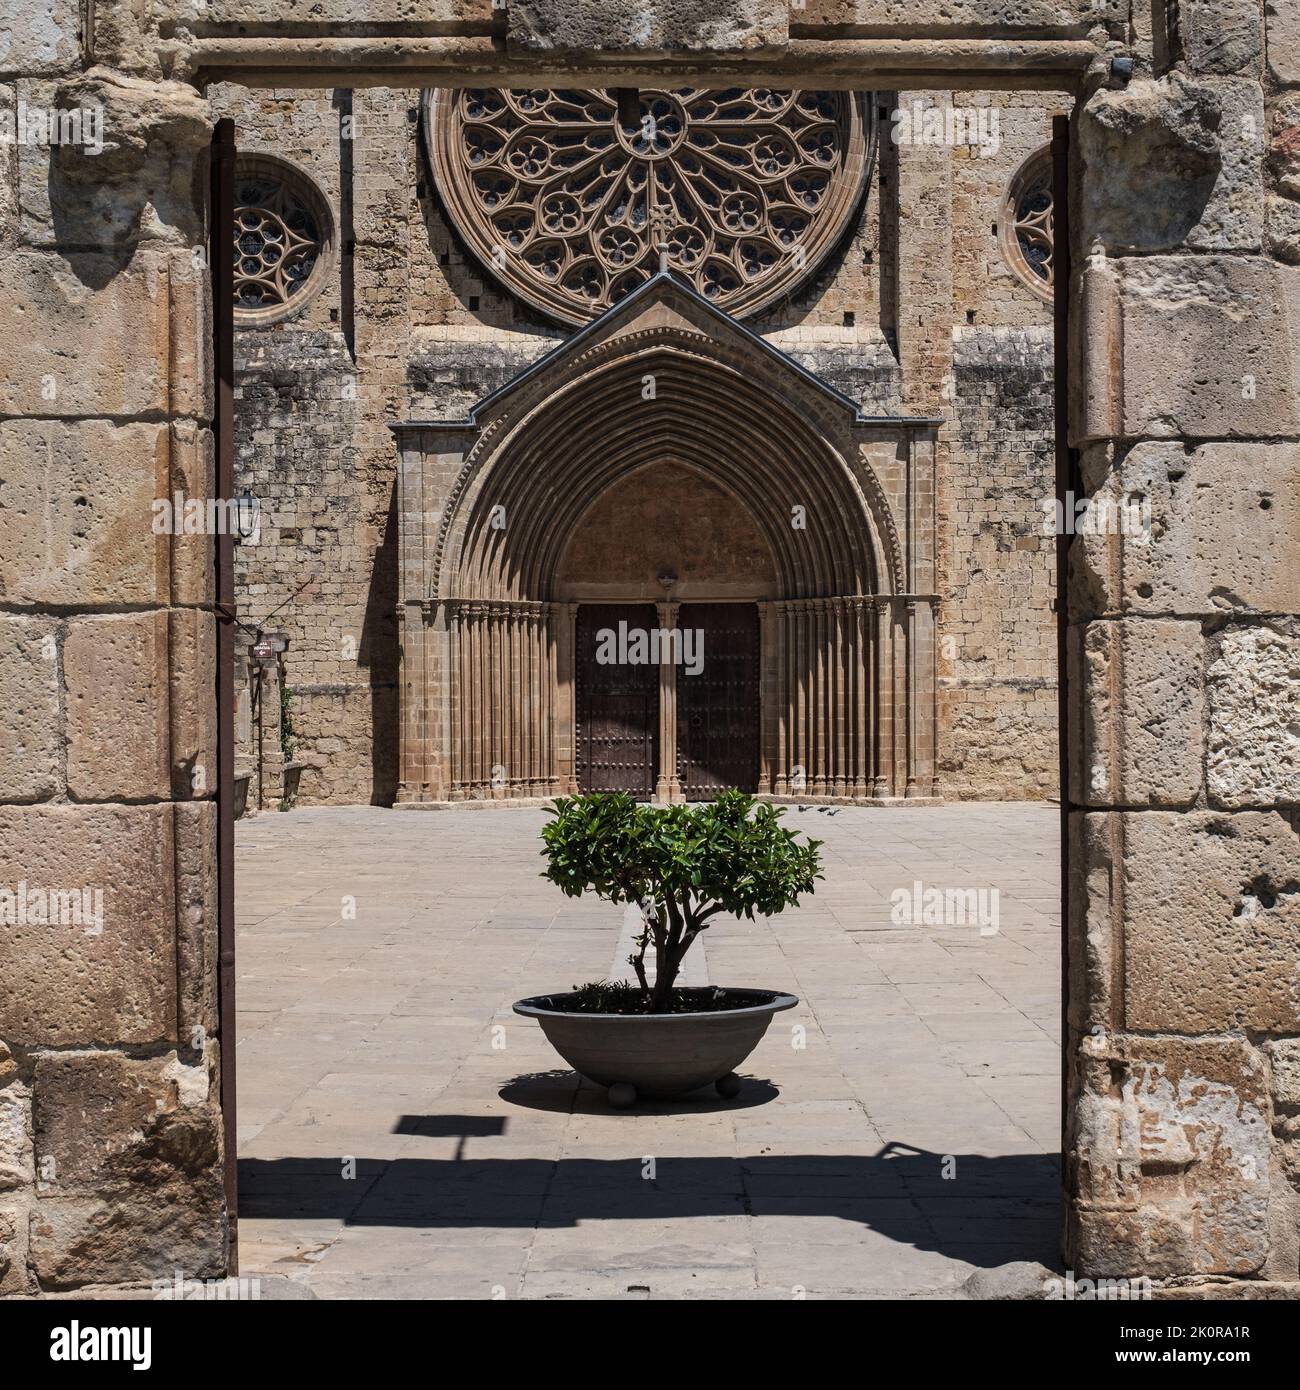 View of the main entrance to the Monastery of Sant Cugat del Vallès, an ancient Benedictine abbey that gives its name to this Catalan town. Stock Photo